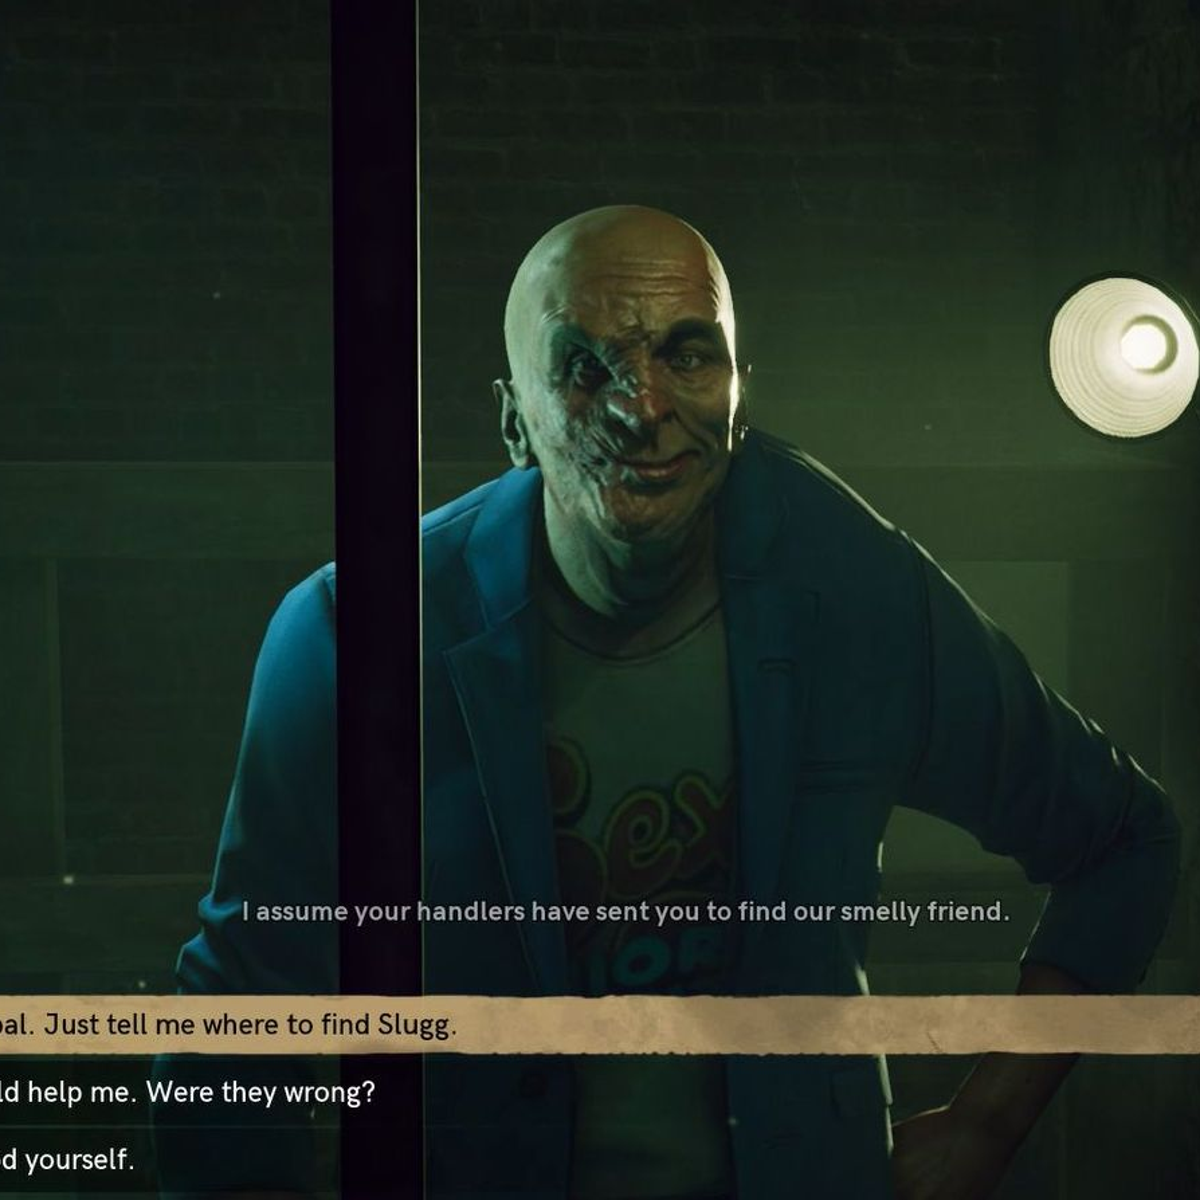 Vampire: The Masquerade - Bloodlines 2 is back and now under